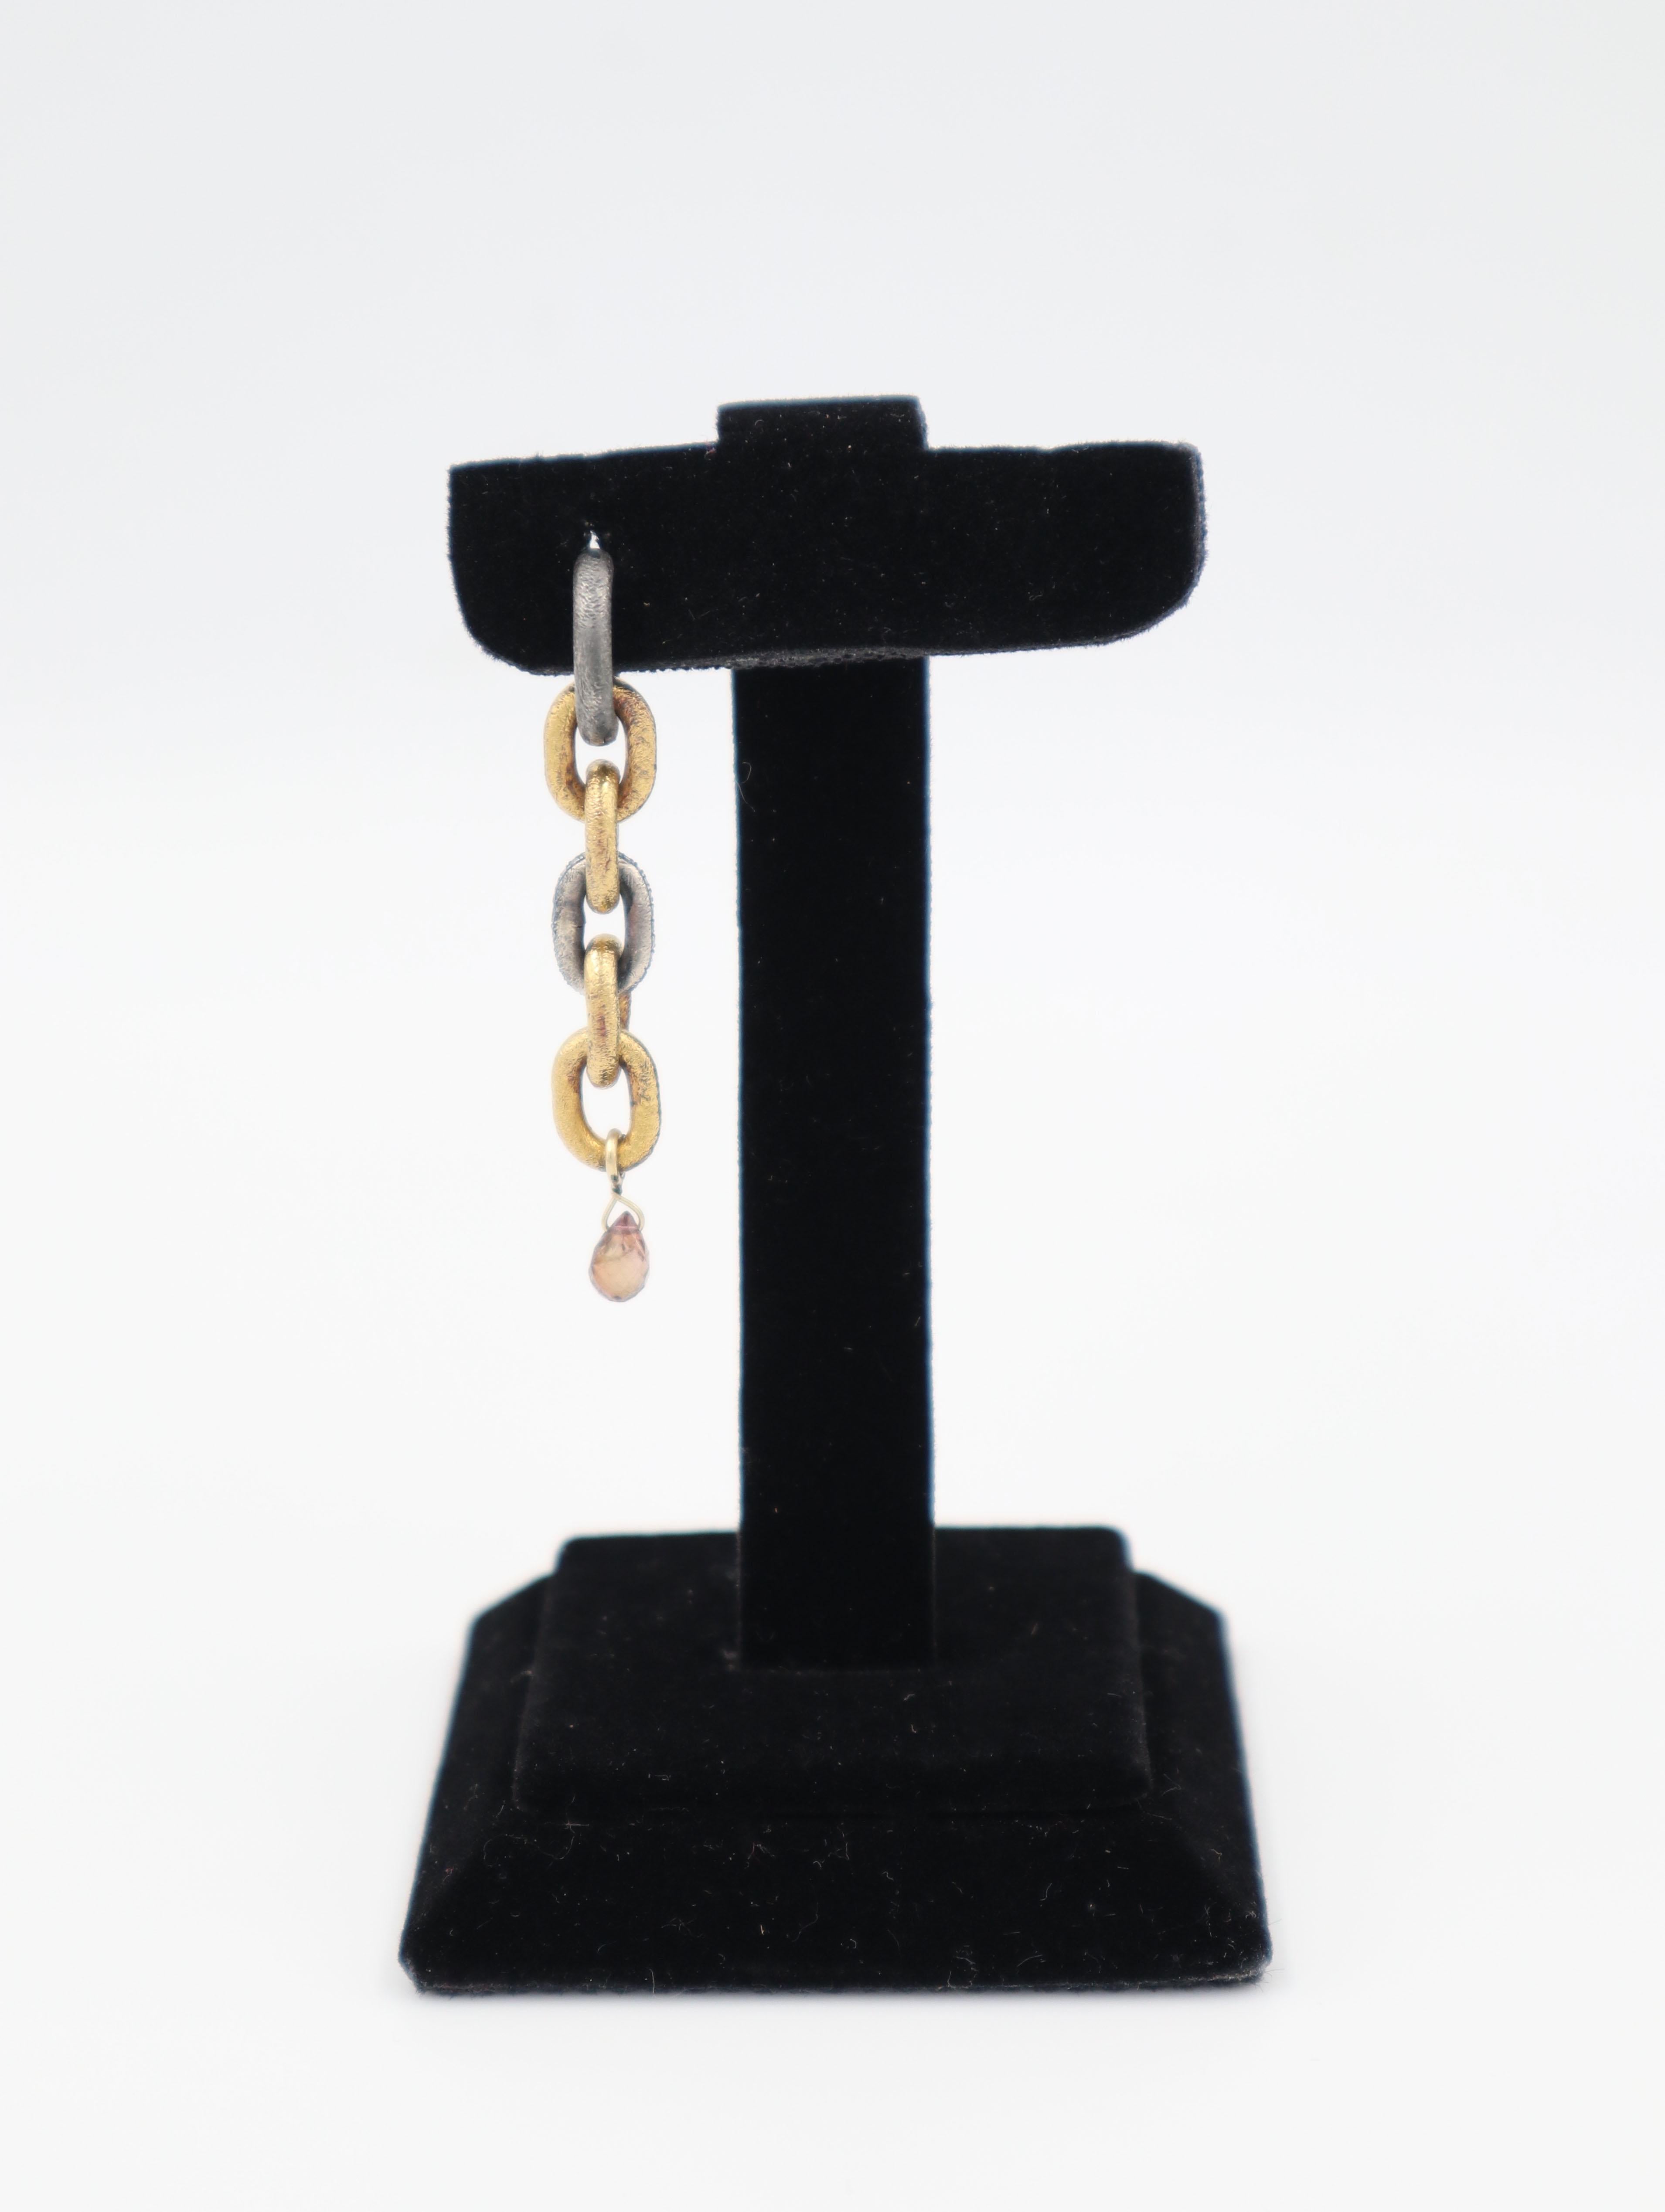 Briolette Cut Oxidized Silver and 24K Gold Plated Chain Earring with Tourmaline(sold as single